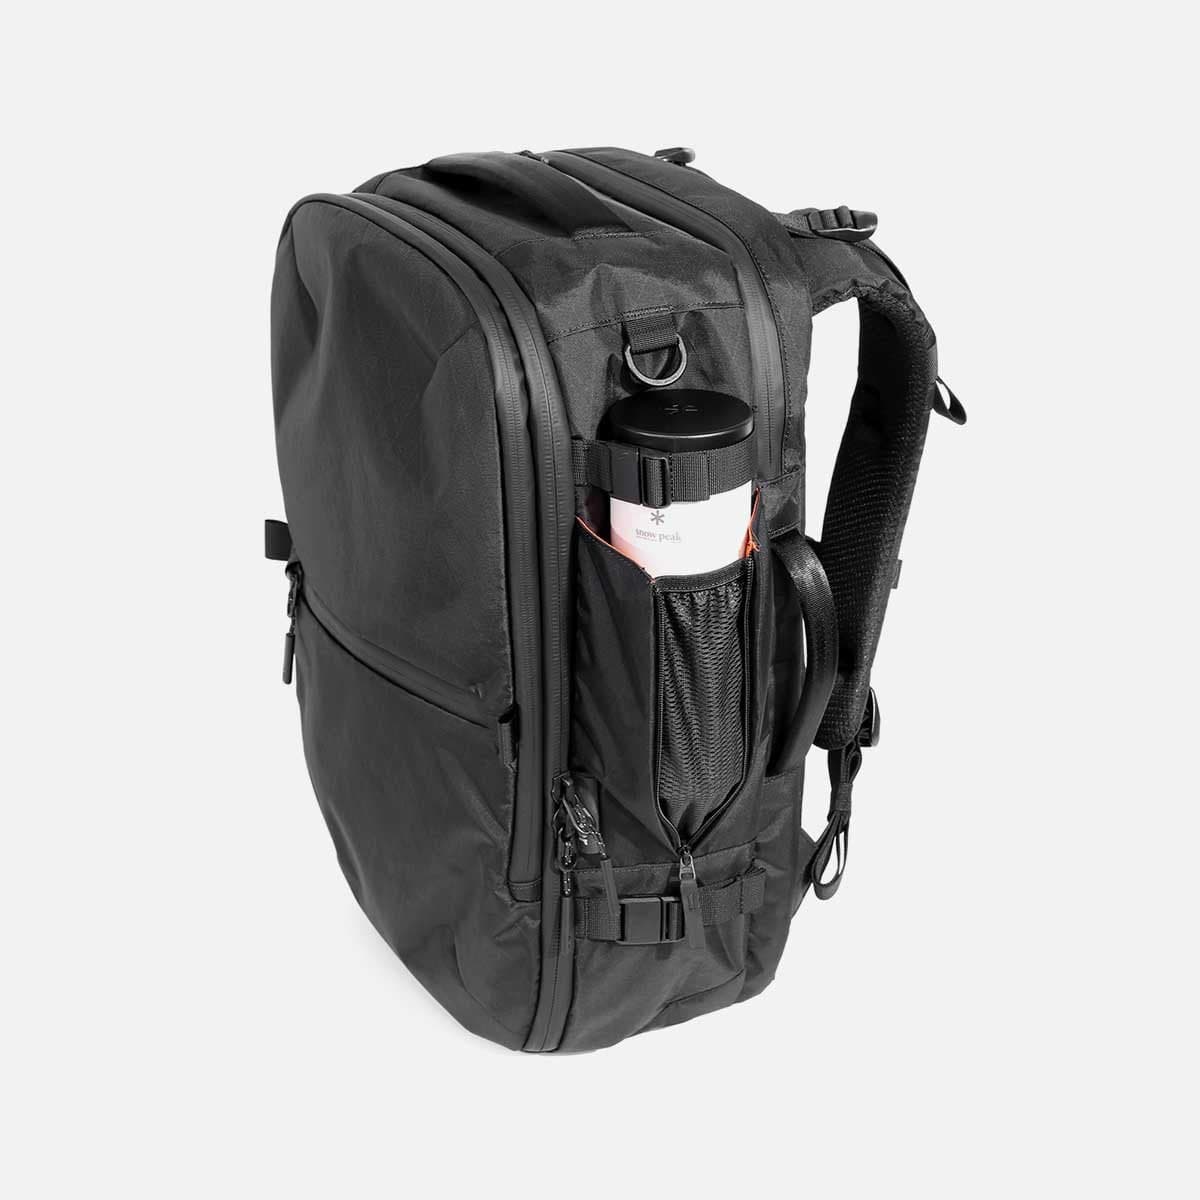 AER Travel Pack 2 Review  Our Top Travel Backpack Pick Of!